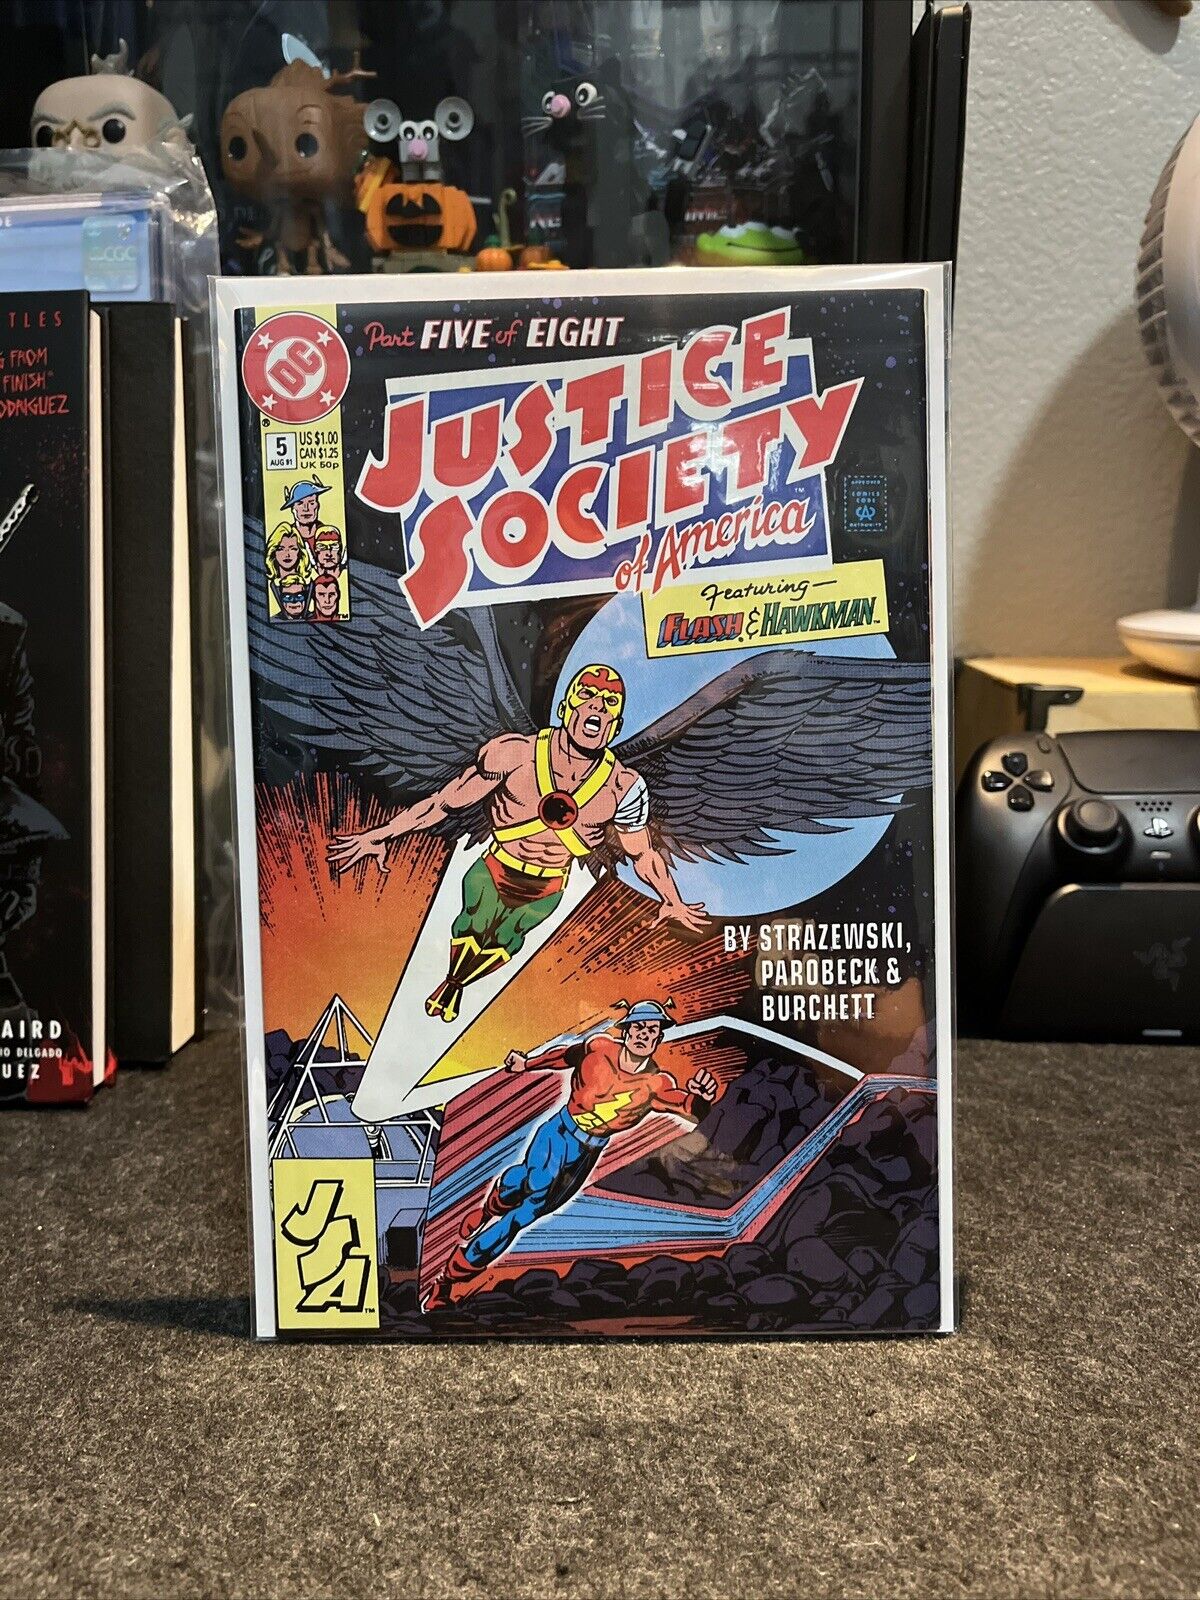 Justice Society of America #5 - featuring Flash & Hawkman (Aug 1991 DC)